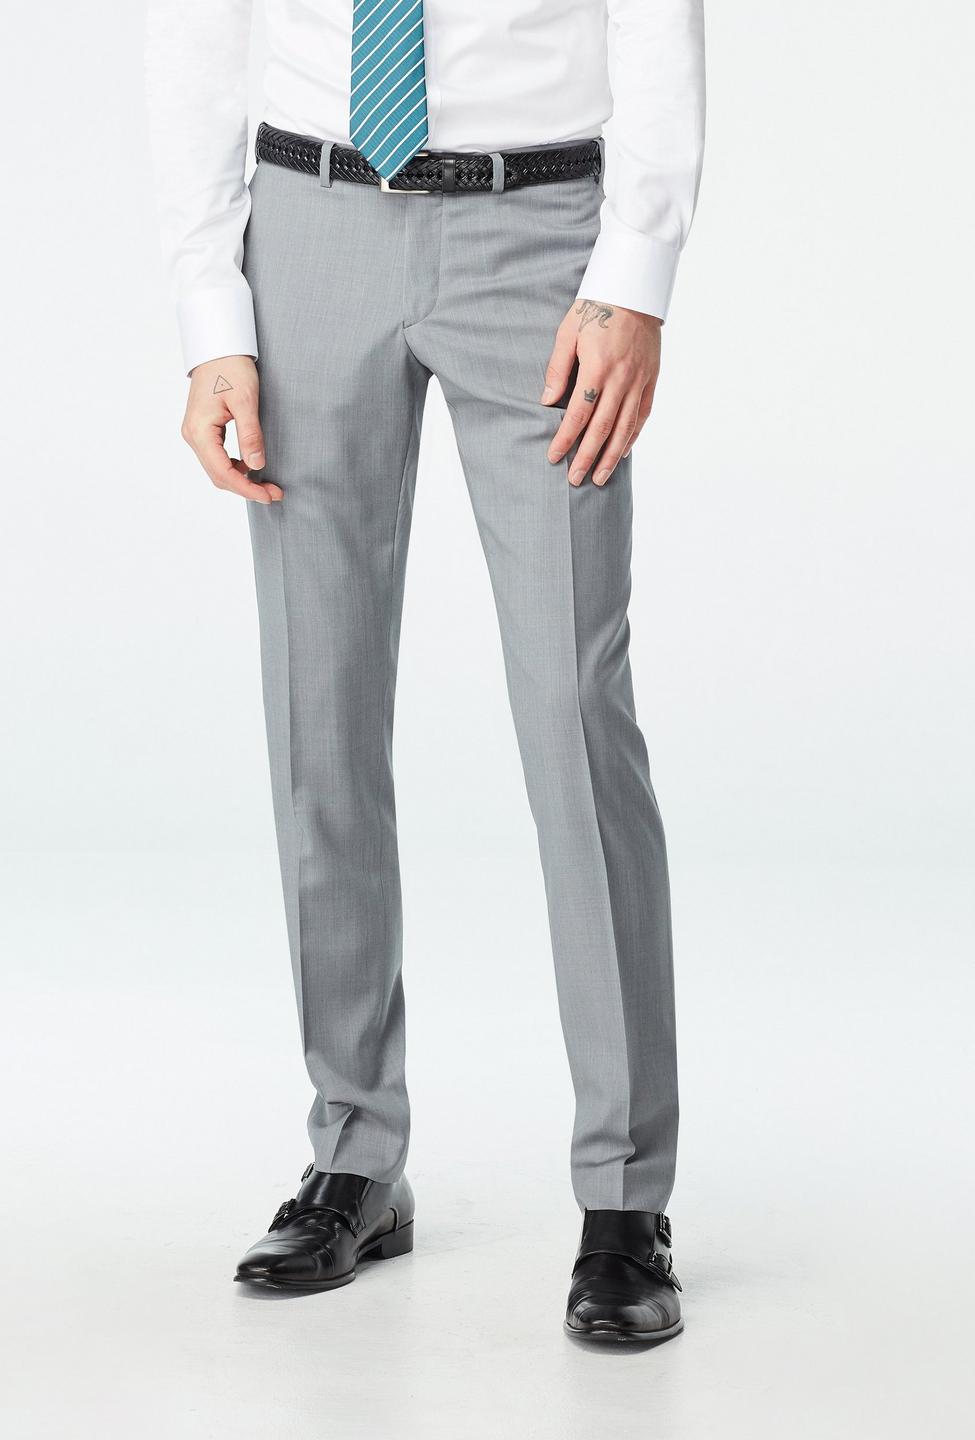 Blue and White pants - Checked Design from Indochino Collection